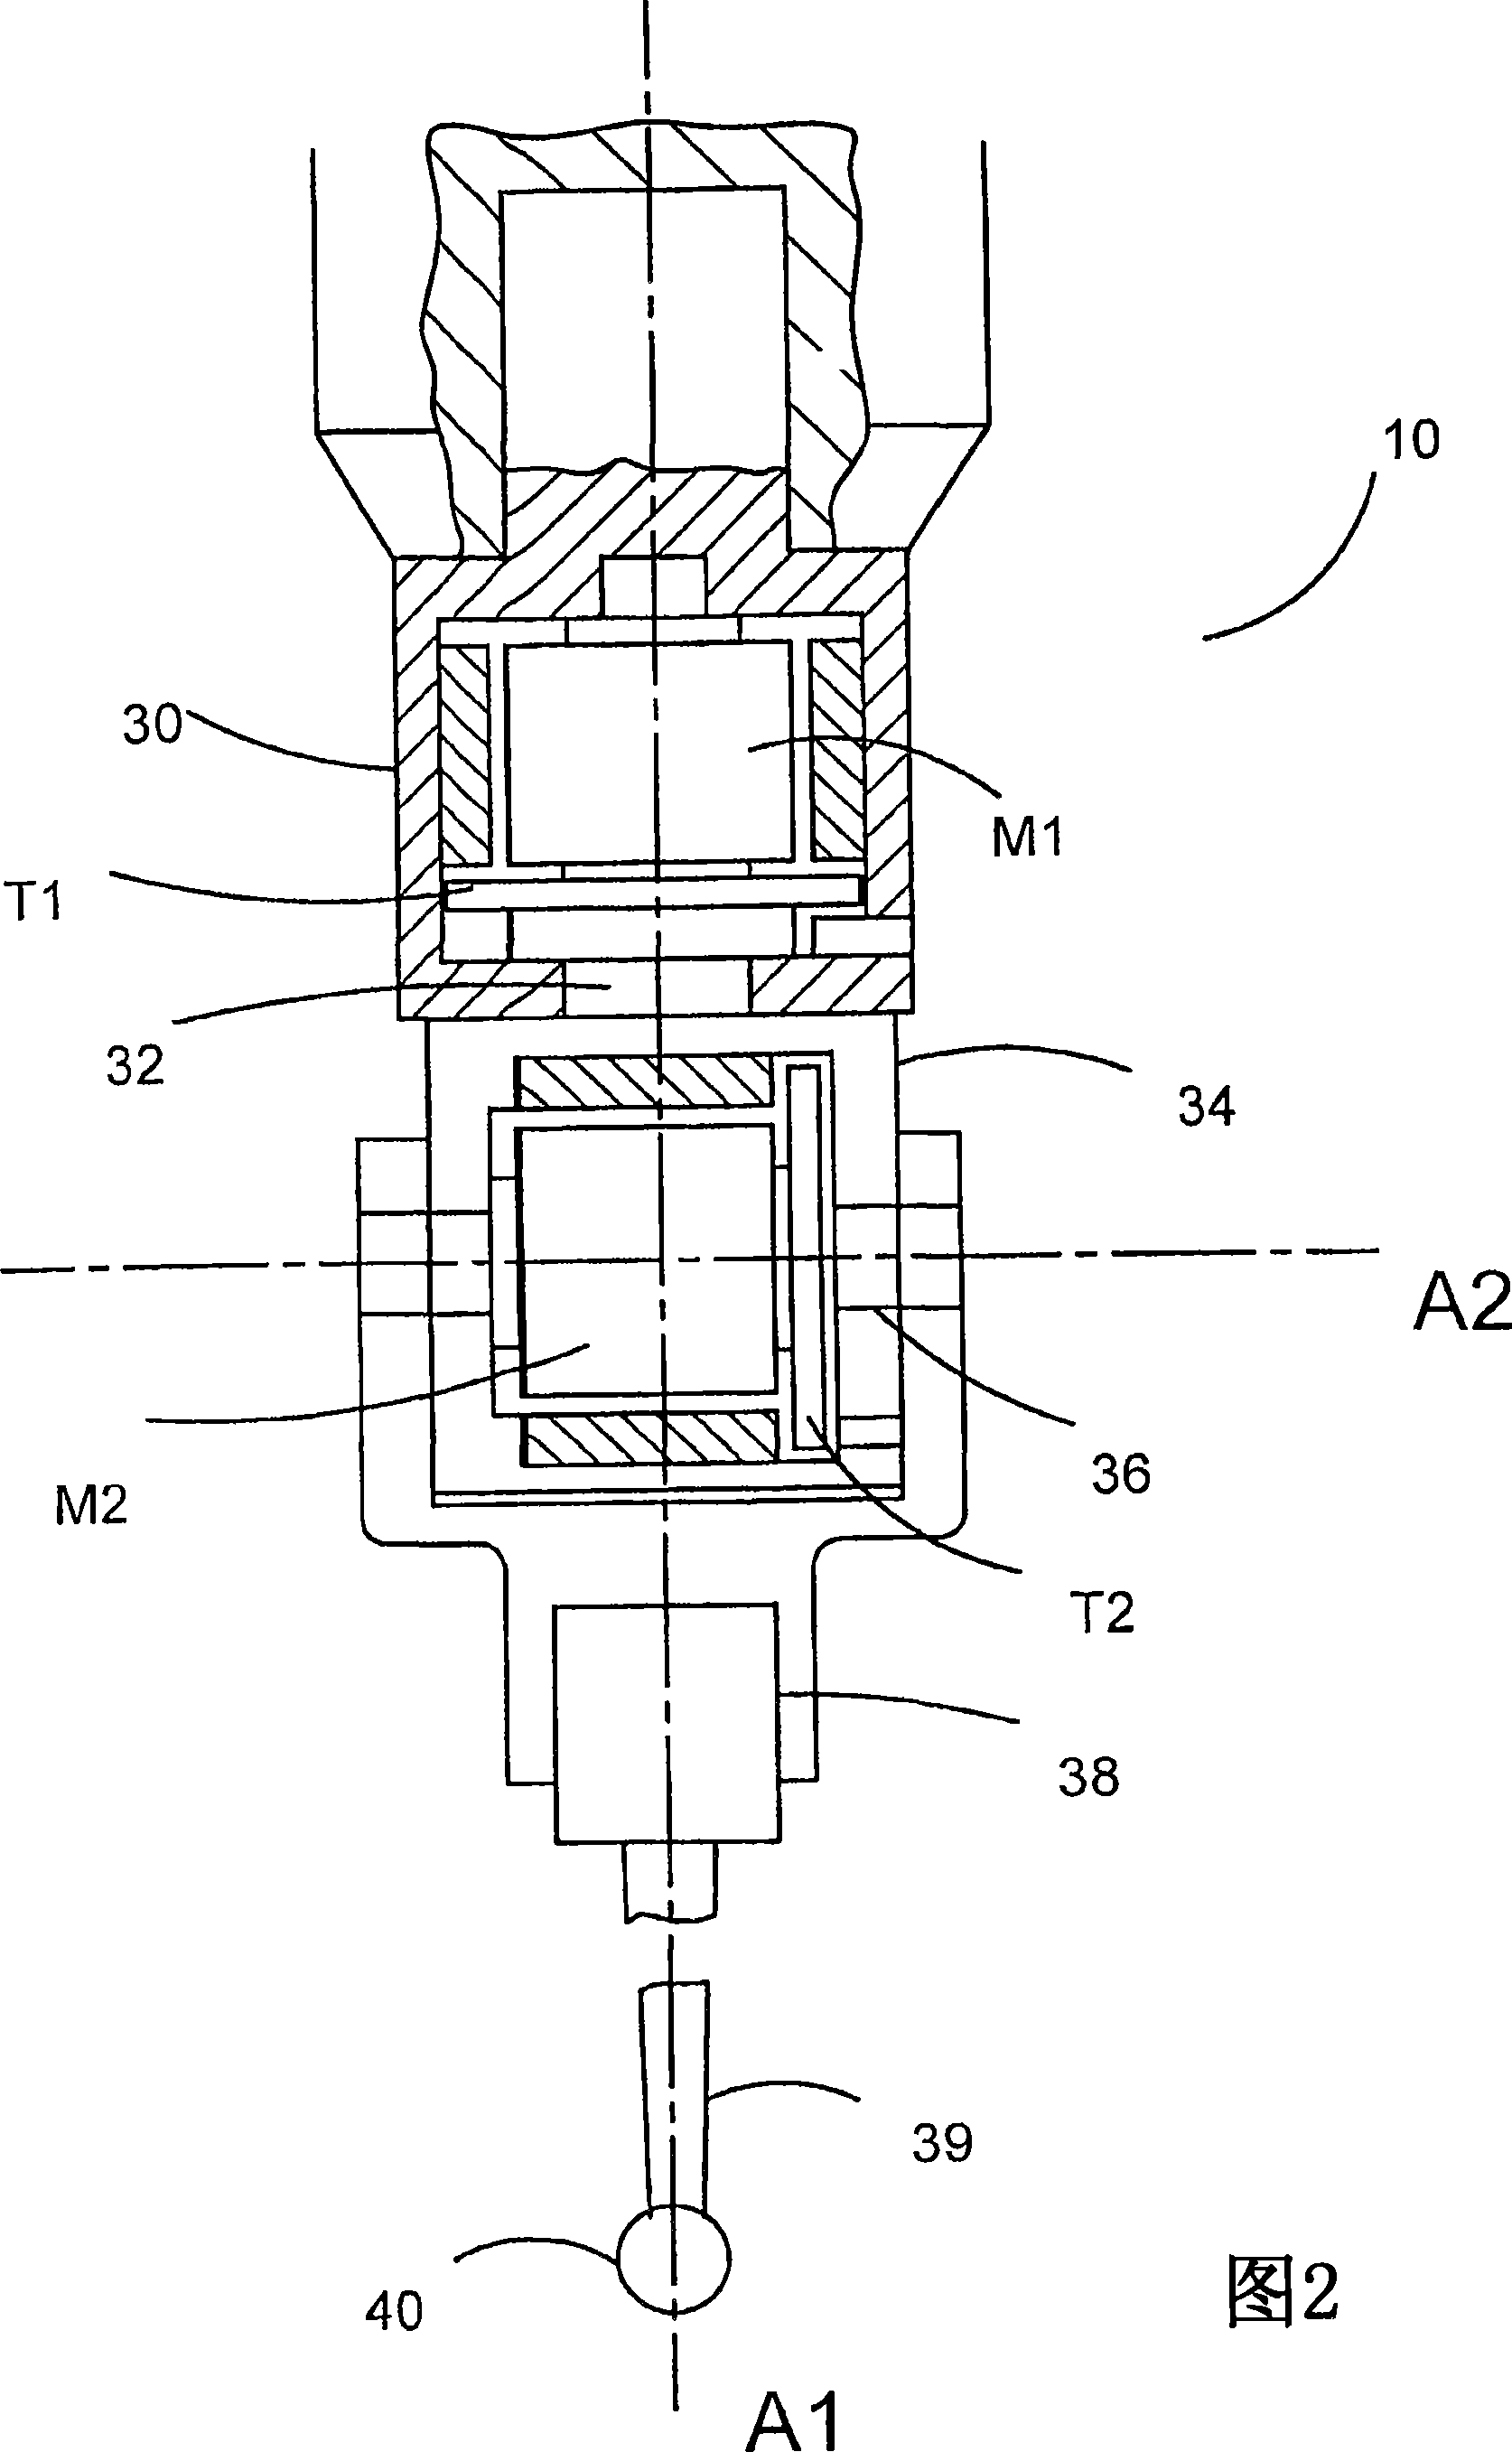 Method of error compensation in a coordinate measuring machine with an articulating probe head